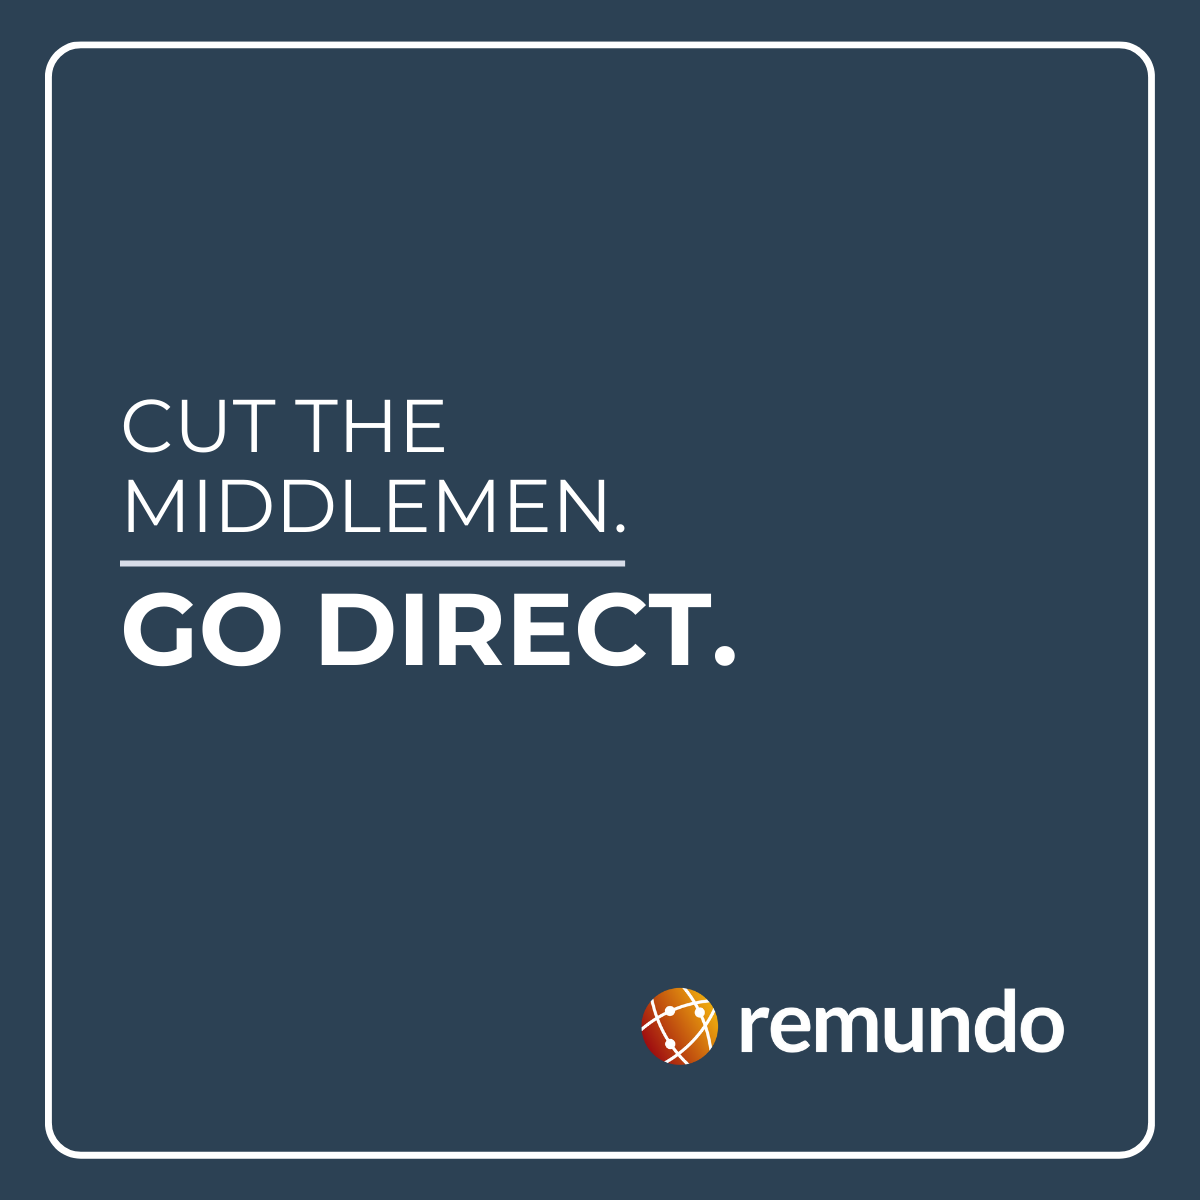 Tired of using middlemen and getting middling service?

Try Remundo's direct approach. Local entities. Globally consistent service.

Learn more: eu1.hubs.ly/H093jh00

#DirectApproach #ExceptionalService #EmployerOfRecord #GlobalHR #EmploymentCompliance